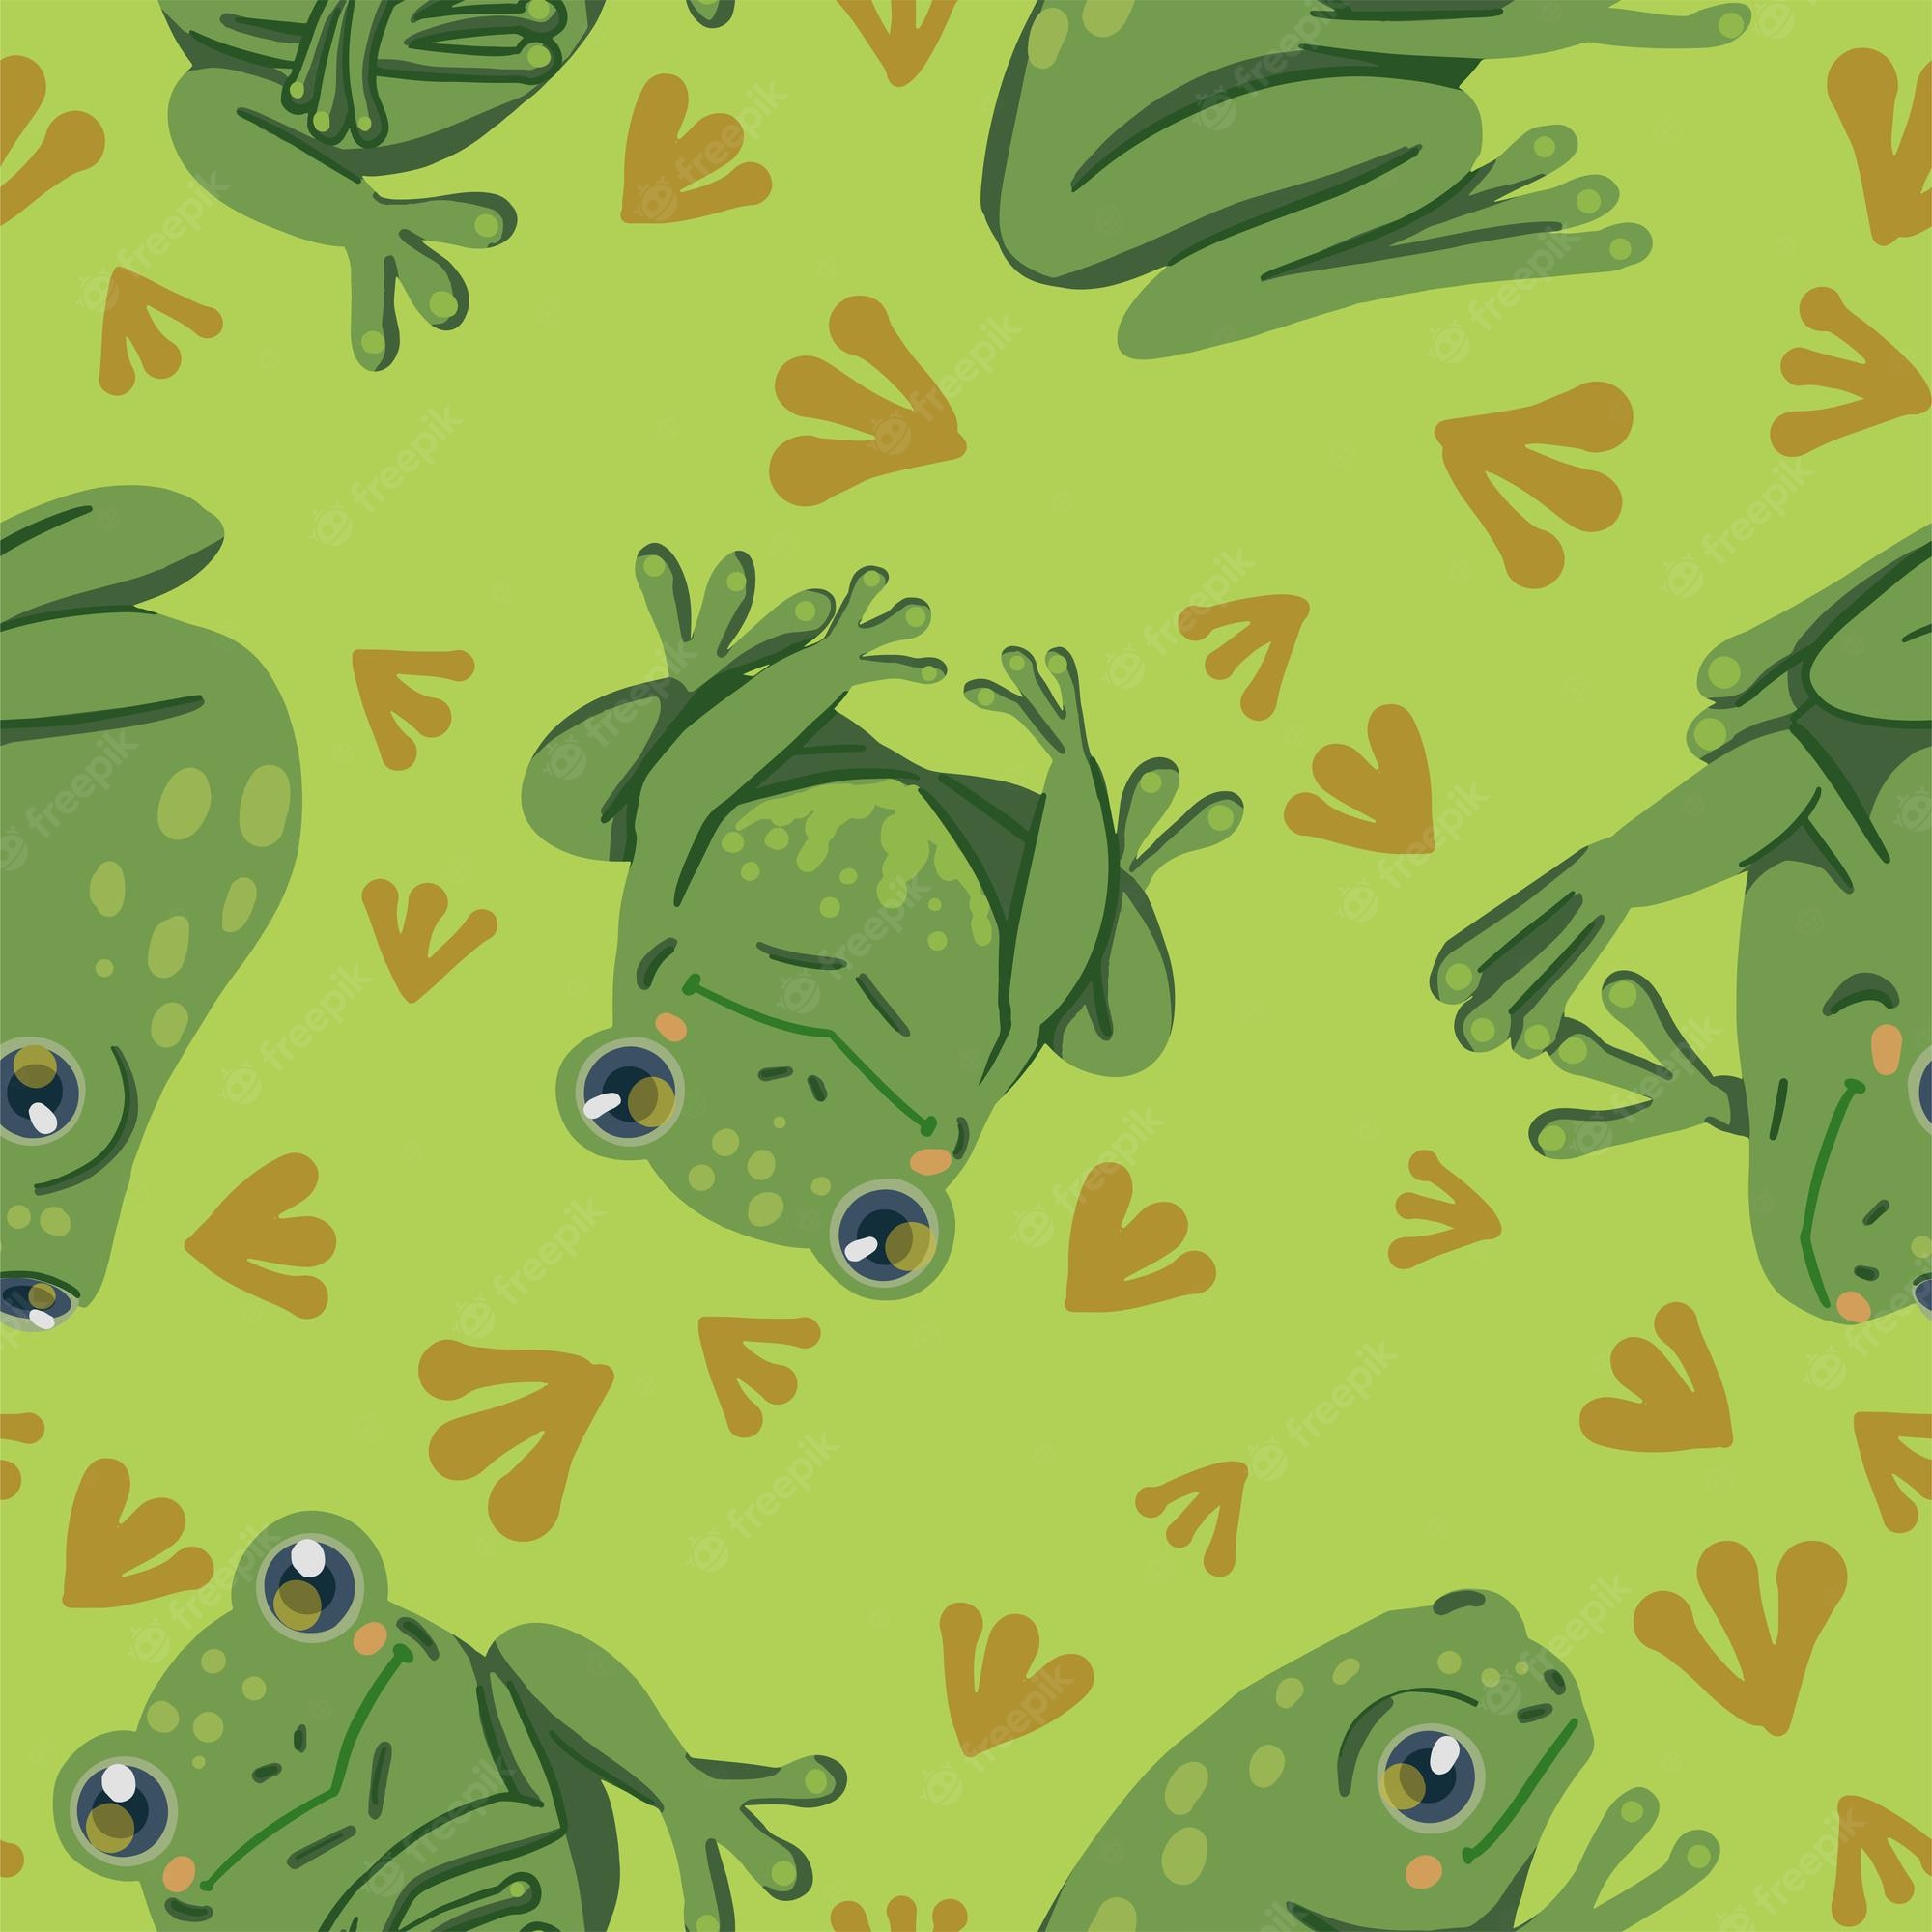 Funny Frogs Wallpapers